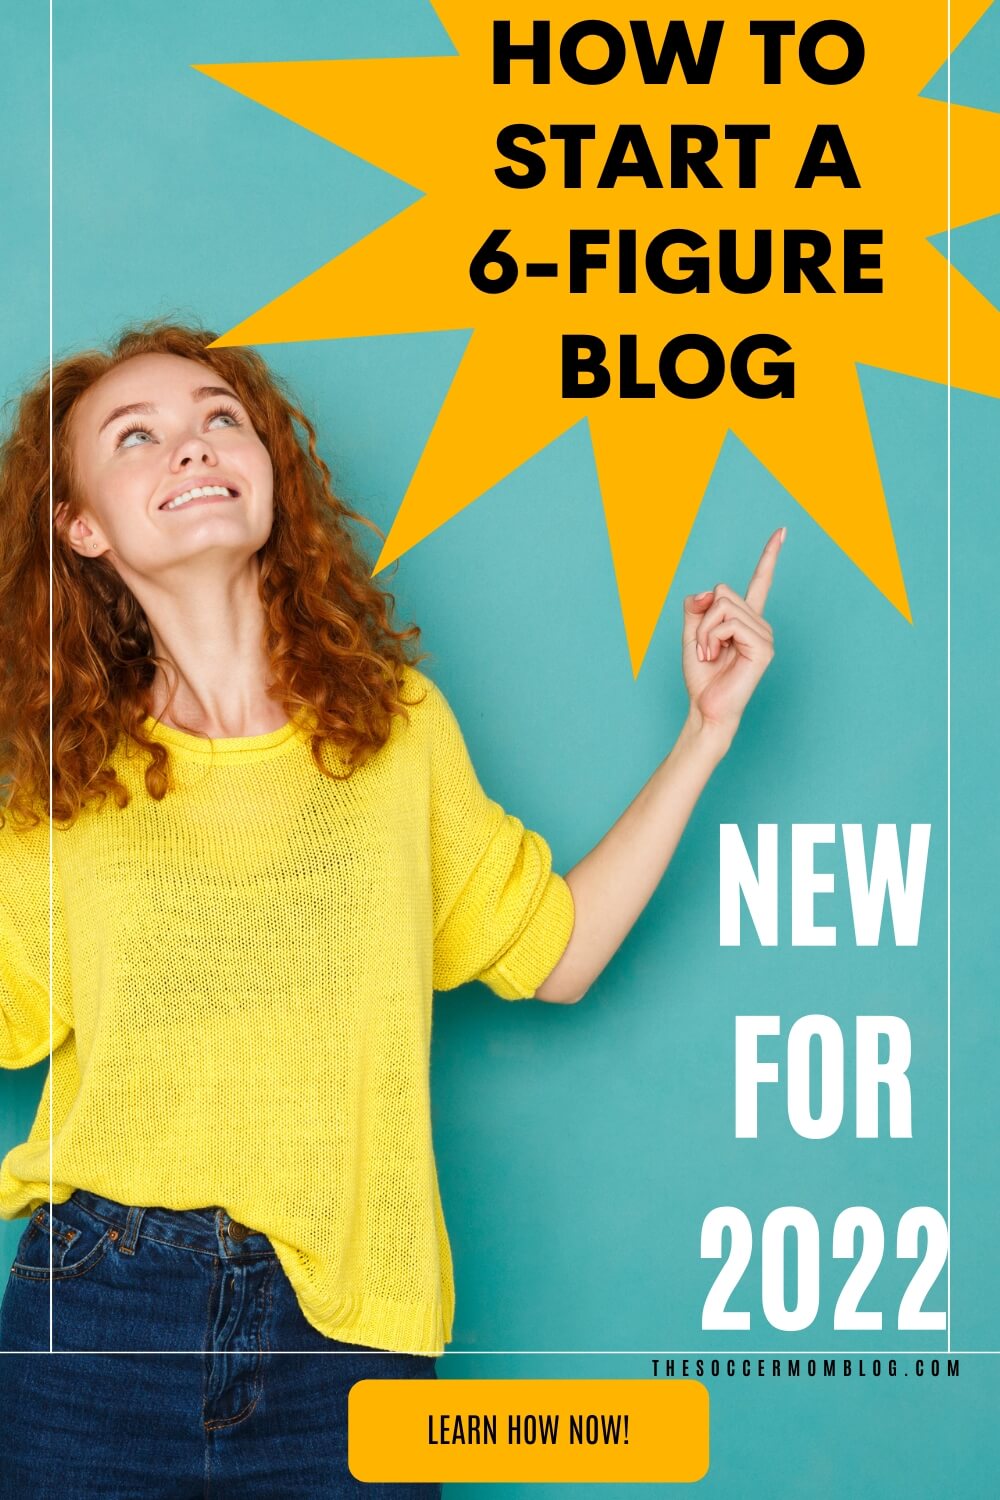 woman on blue background pointing to text bubble: "How to Start a 6-Figure Blog"